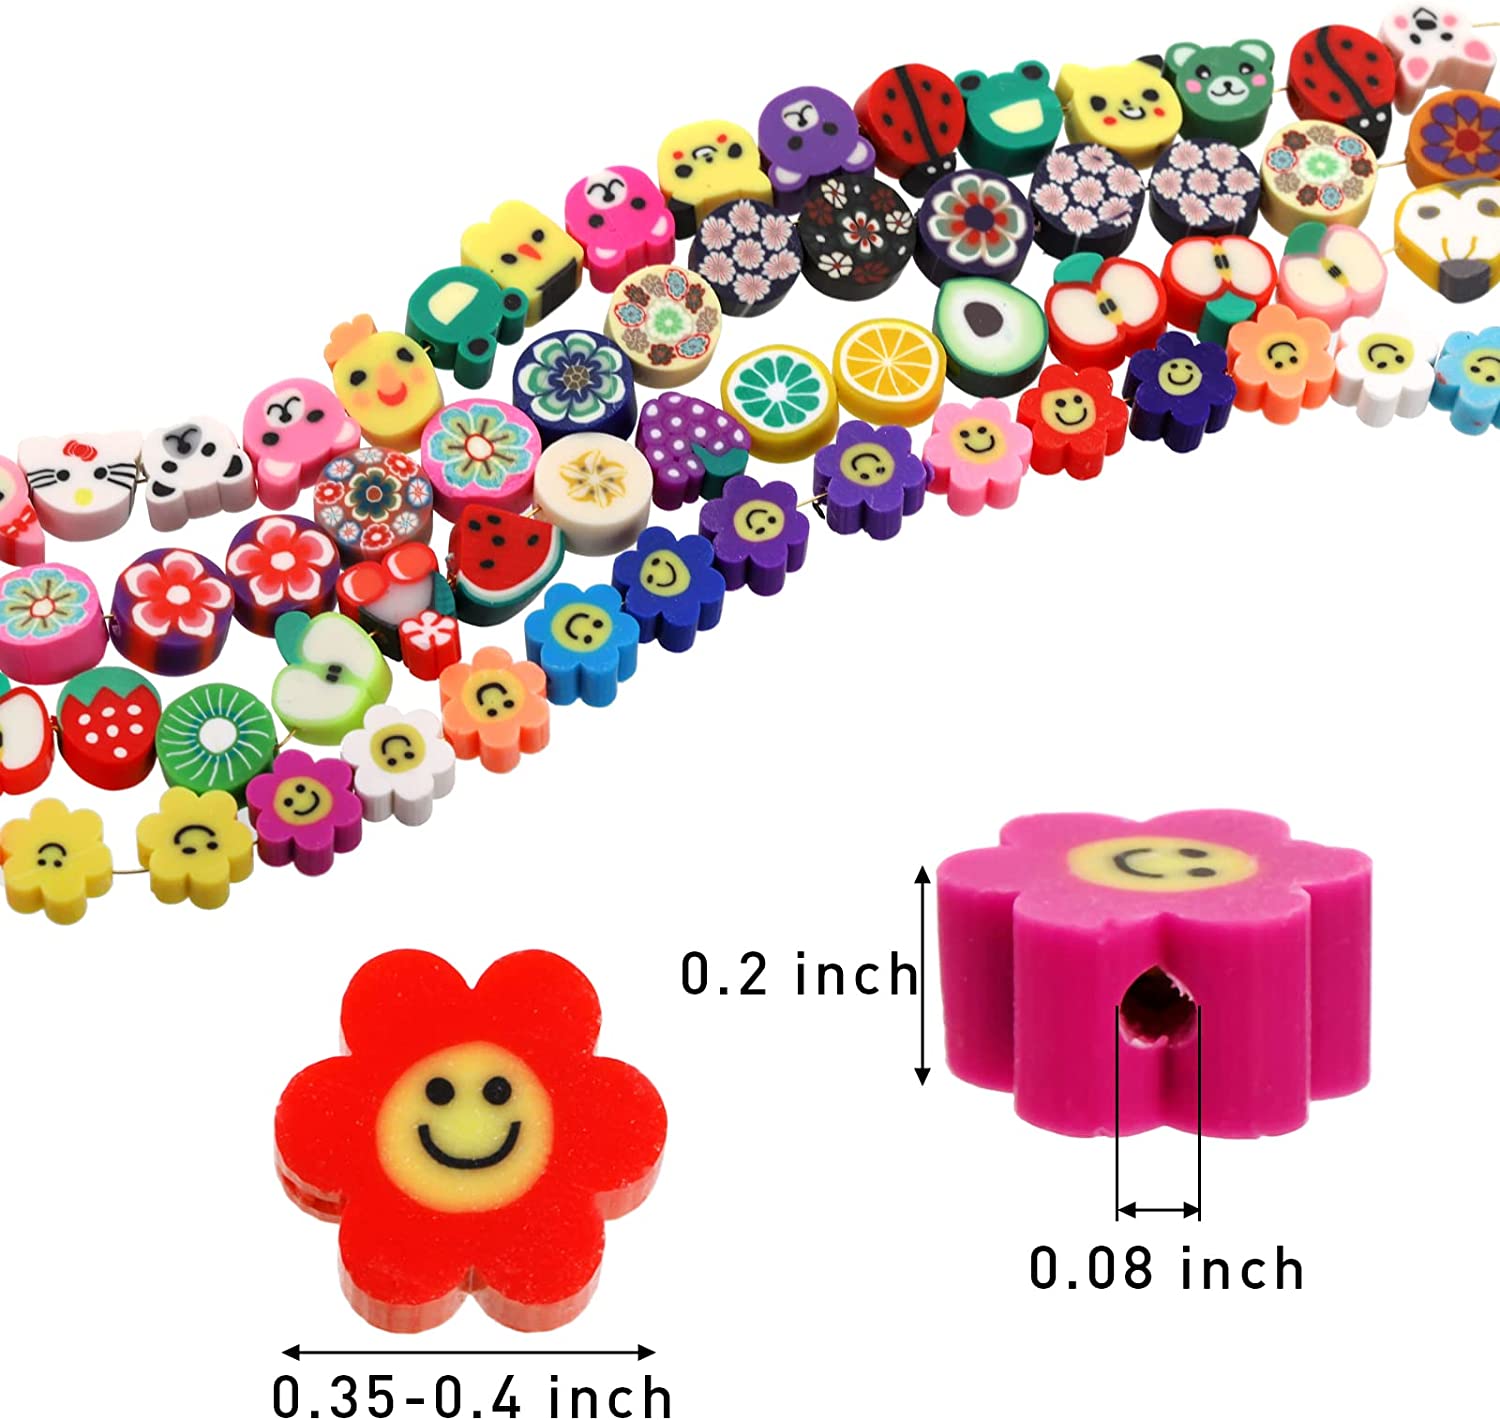 Fimo Polymer Clay Beads, Round Shape Colorfull Beads, Multi-Size Spacer  Fimo Polymer Beads 120 Pcs